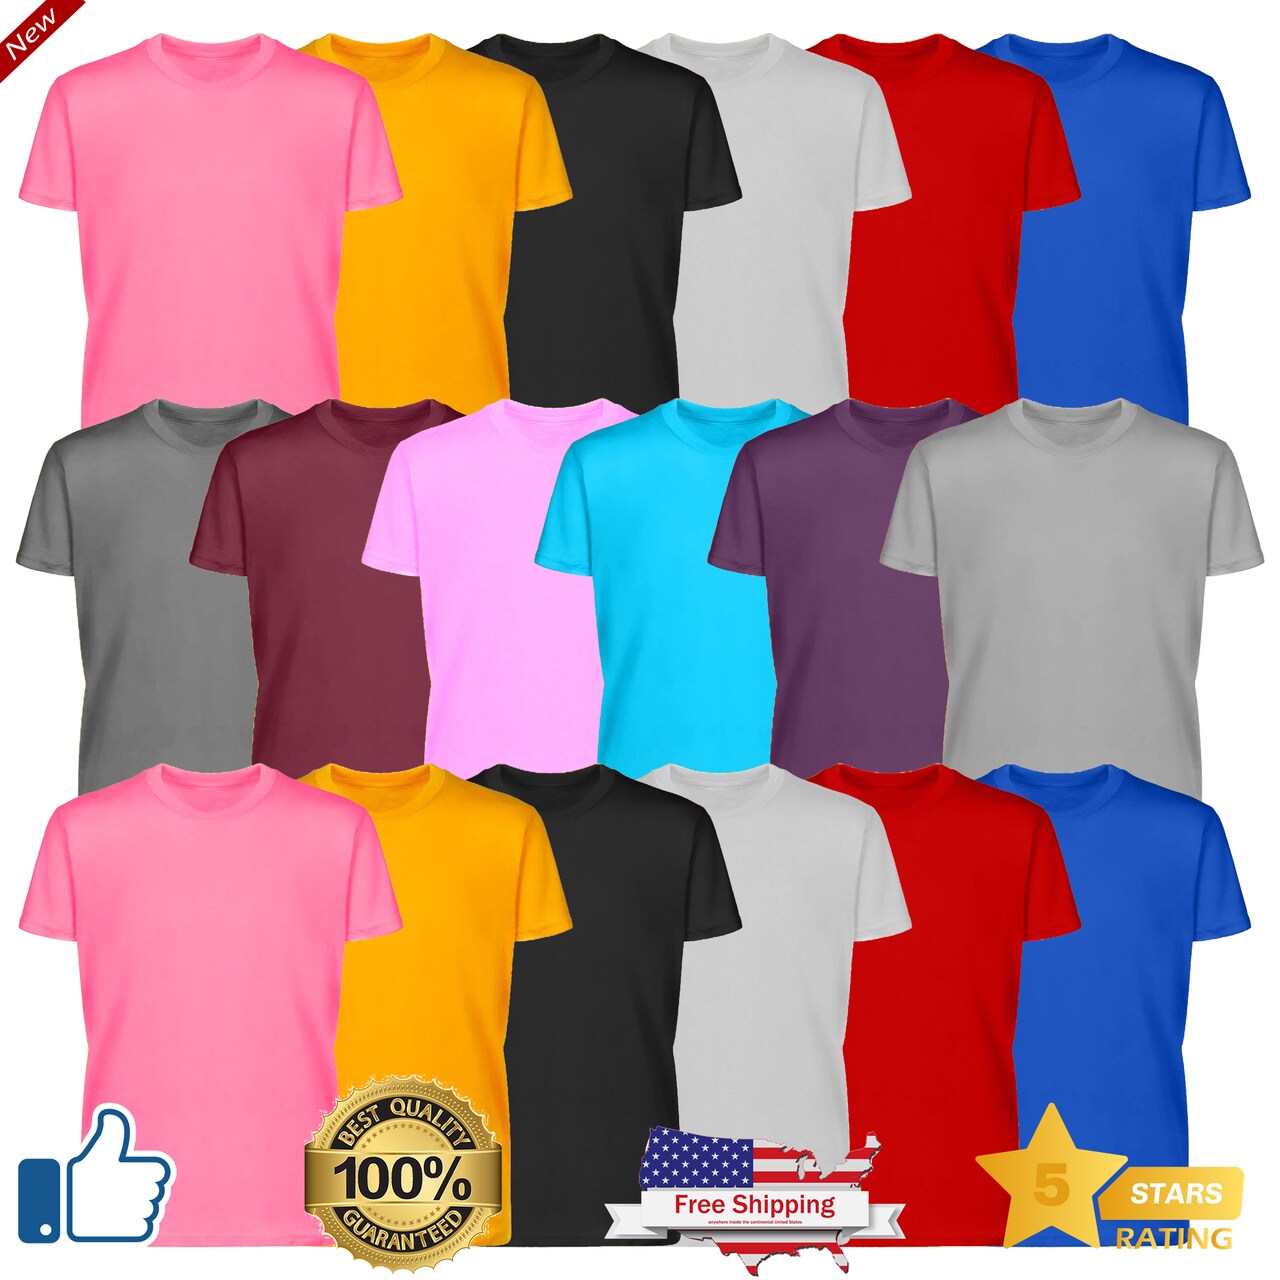 RADYAN Kids Pack size T-shirts - 100% Cotton Short Sleeve T-shirts for Kids | &#x22;Cool and Cute for Fashion-Forward Kids&#x22; - Summer Tees